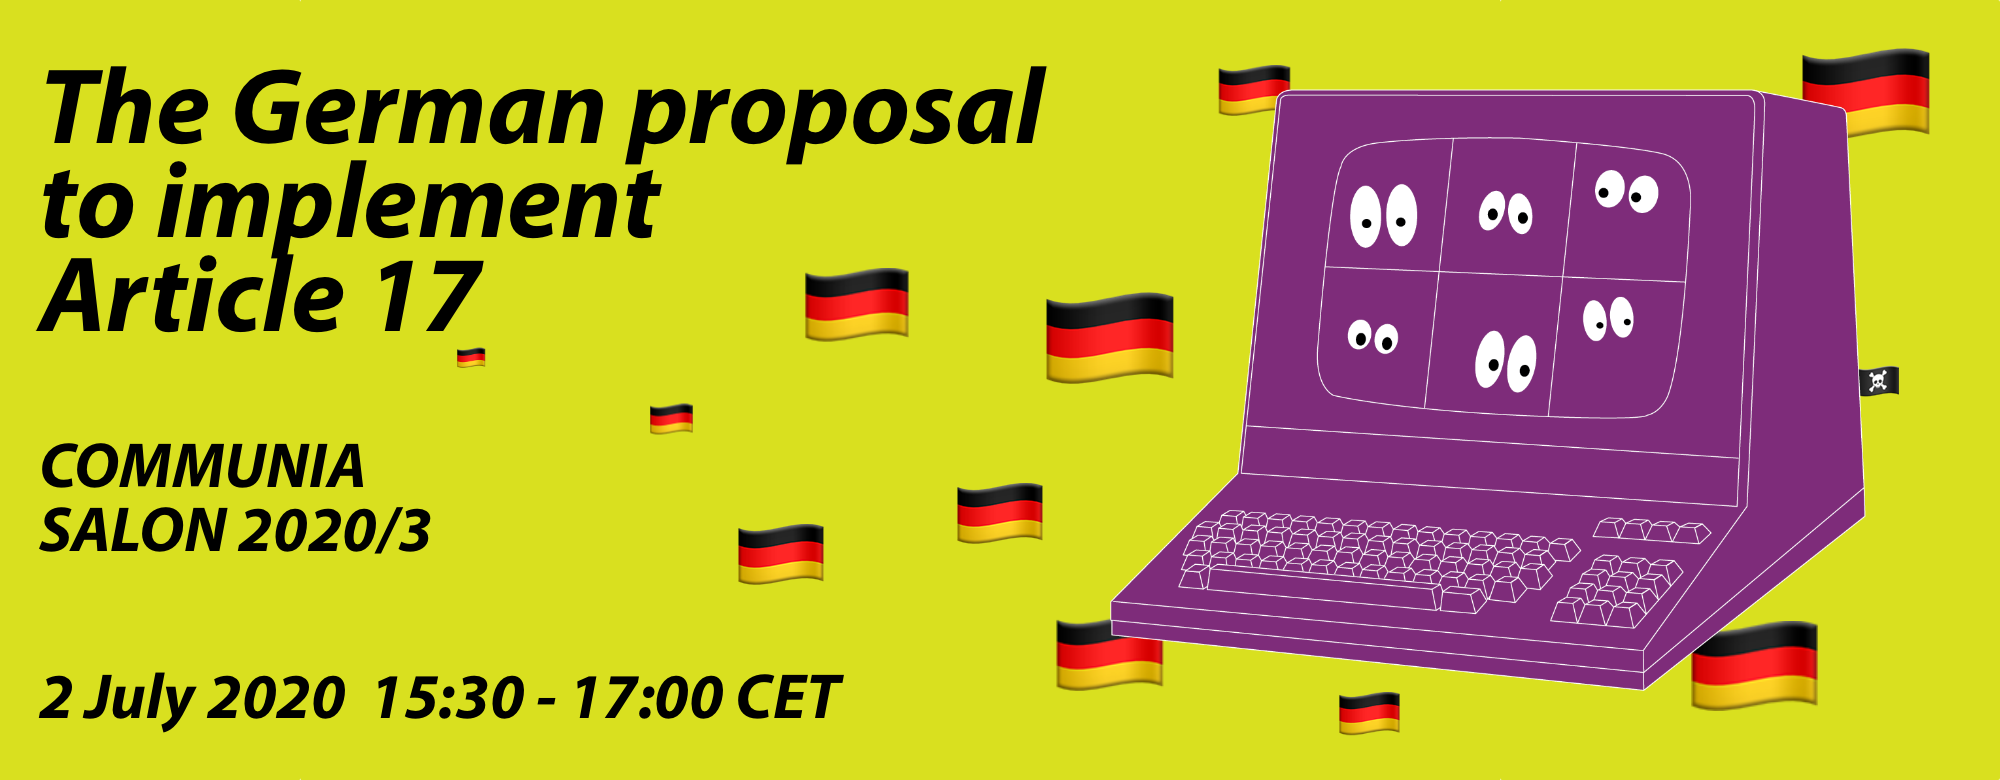 COMMUNIA Salon 2020/3: The German proposal to implement Article 17